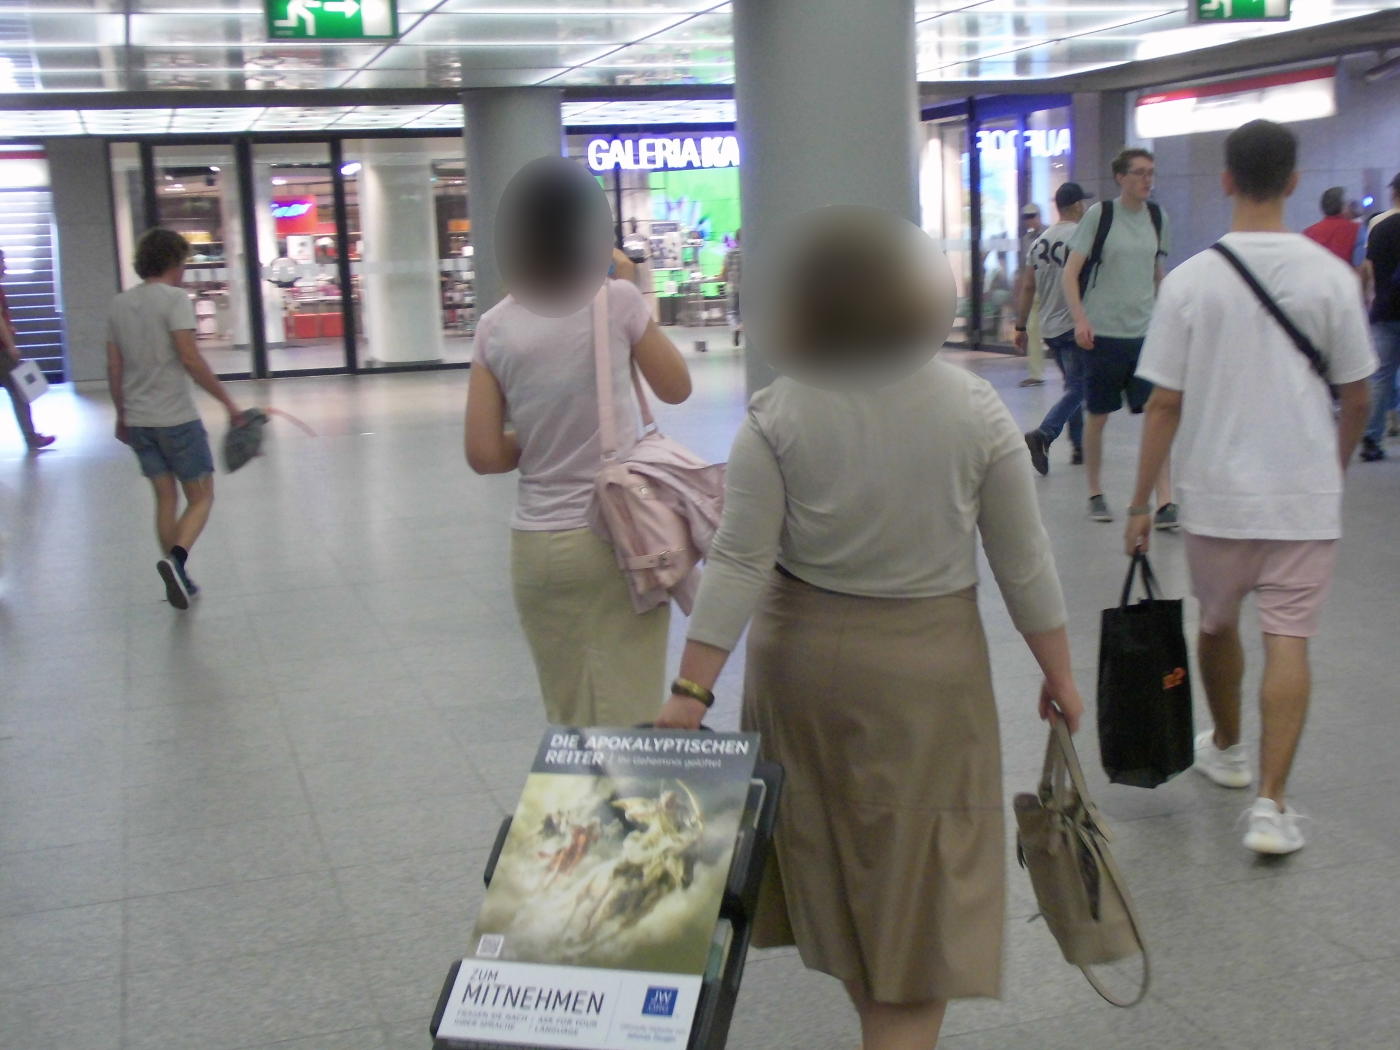 Duesseldorf: Jehovah's Witnesses alarm ... as if they had been prepared